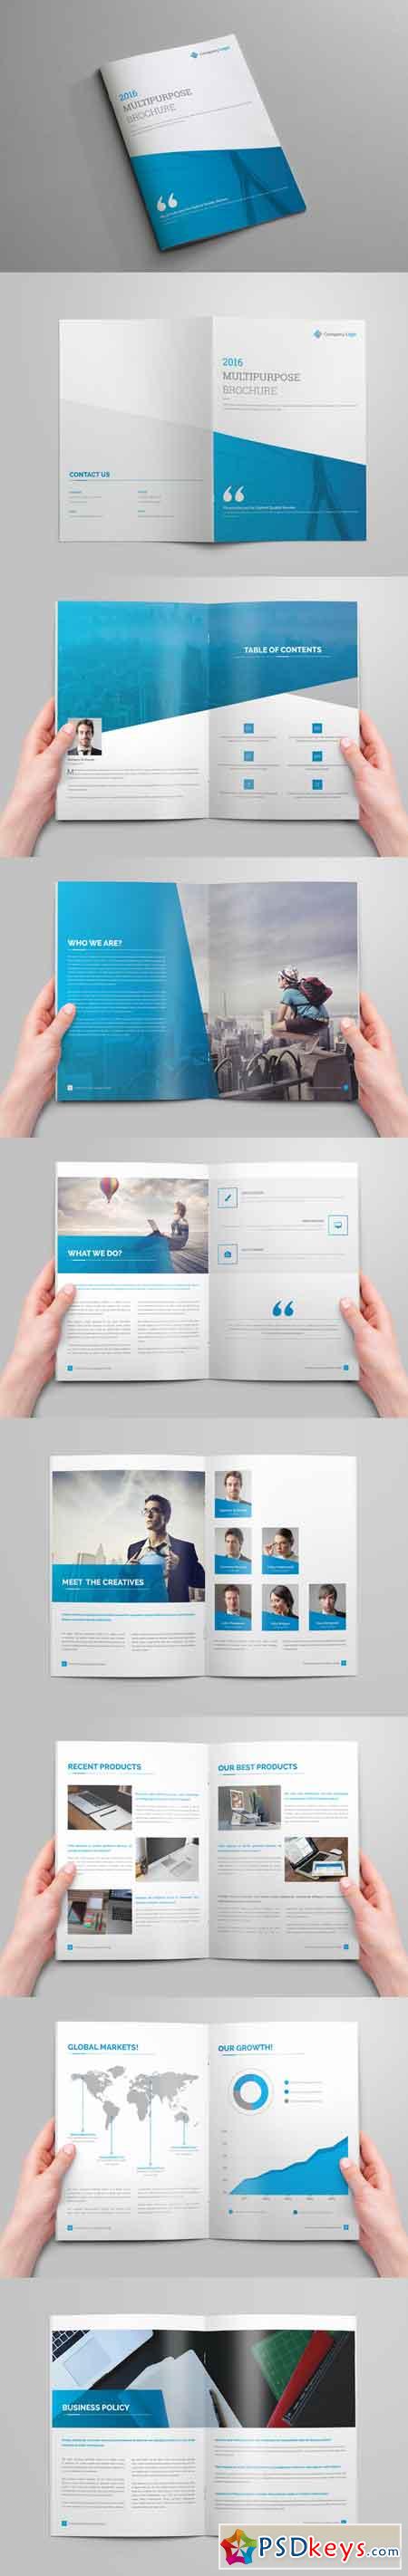 Multipurpose Brochure  16 Pages 625861